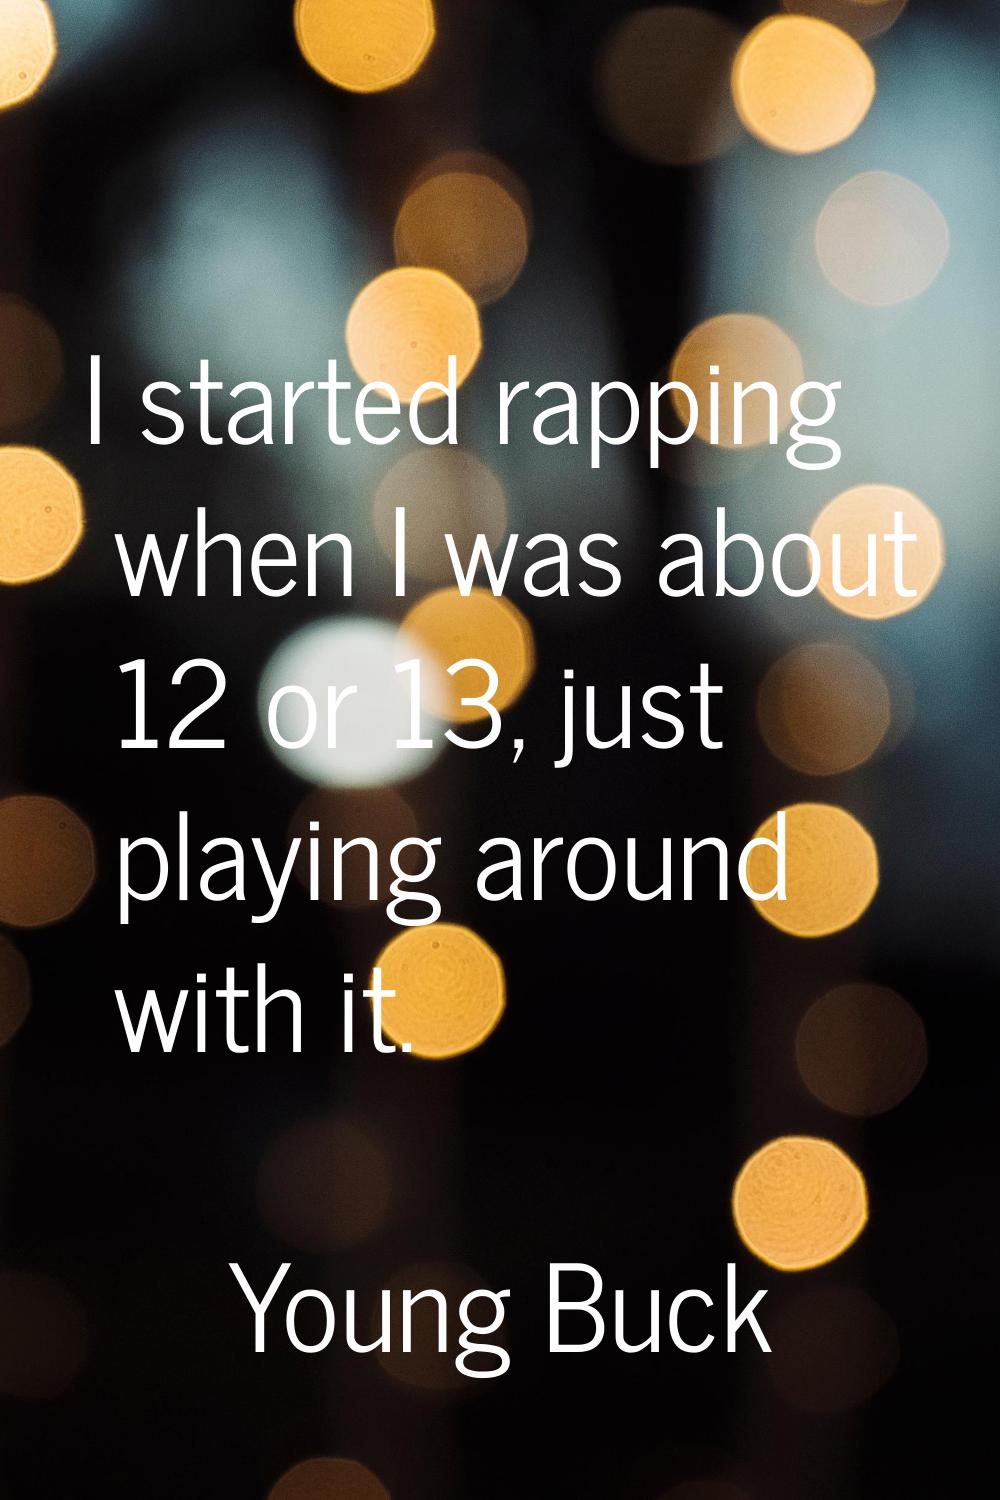 I started rapping when I was about 12 or 13, just playing around with it.